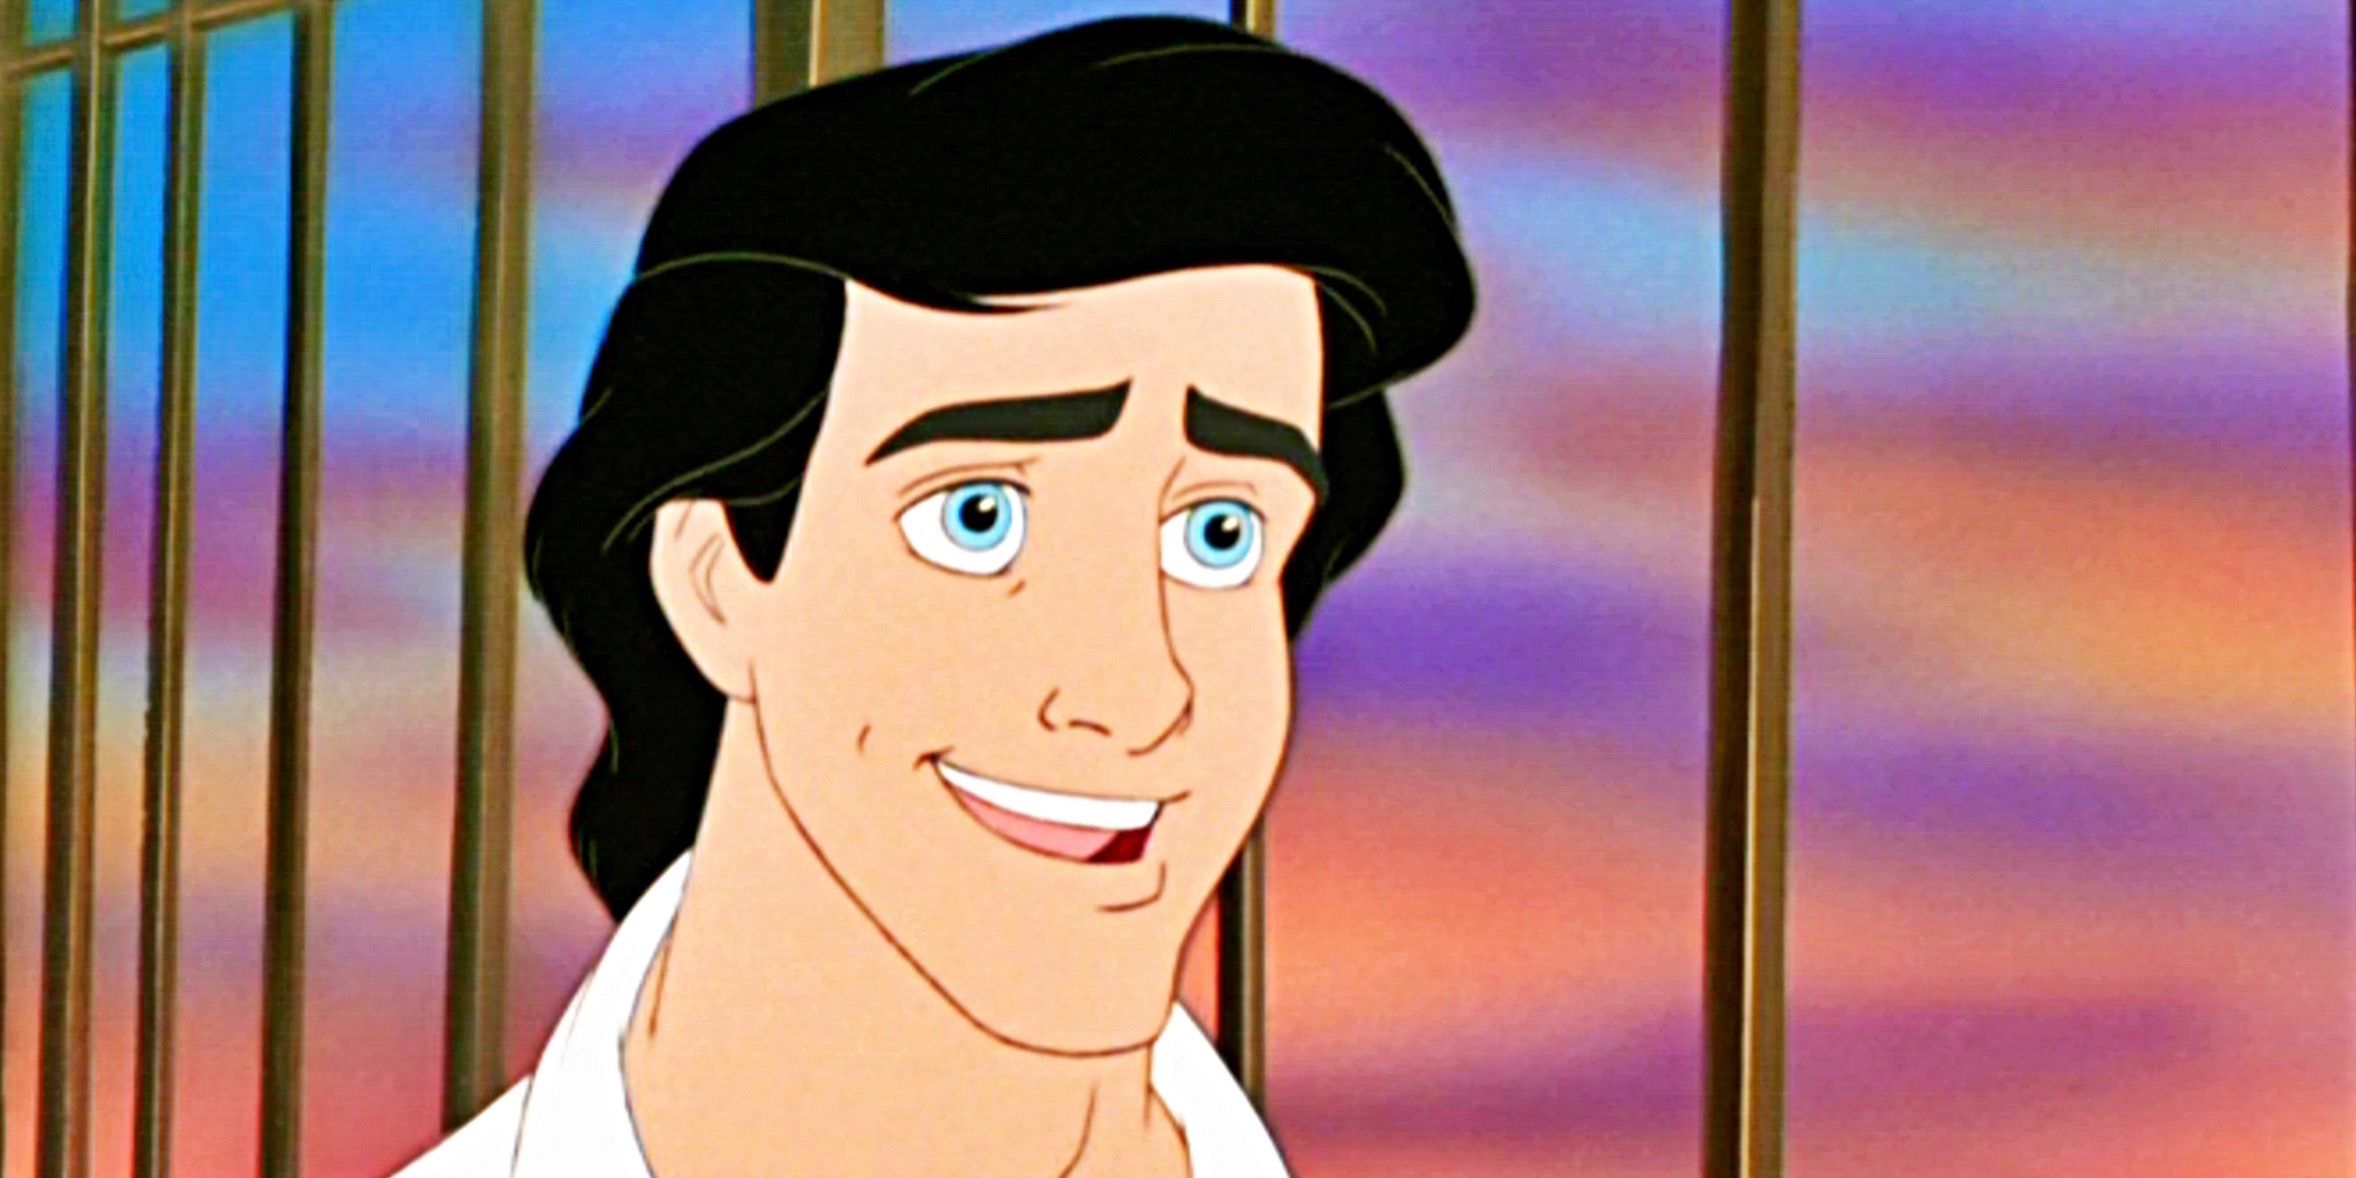 Prince Eric from The Little Mermaid animated movie